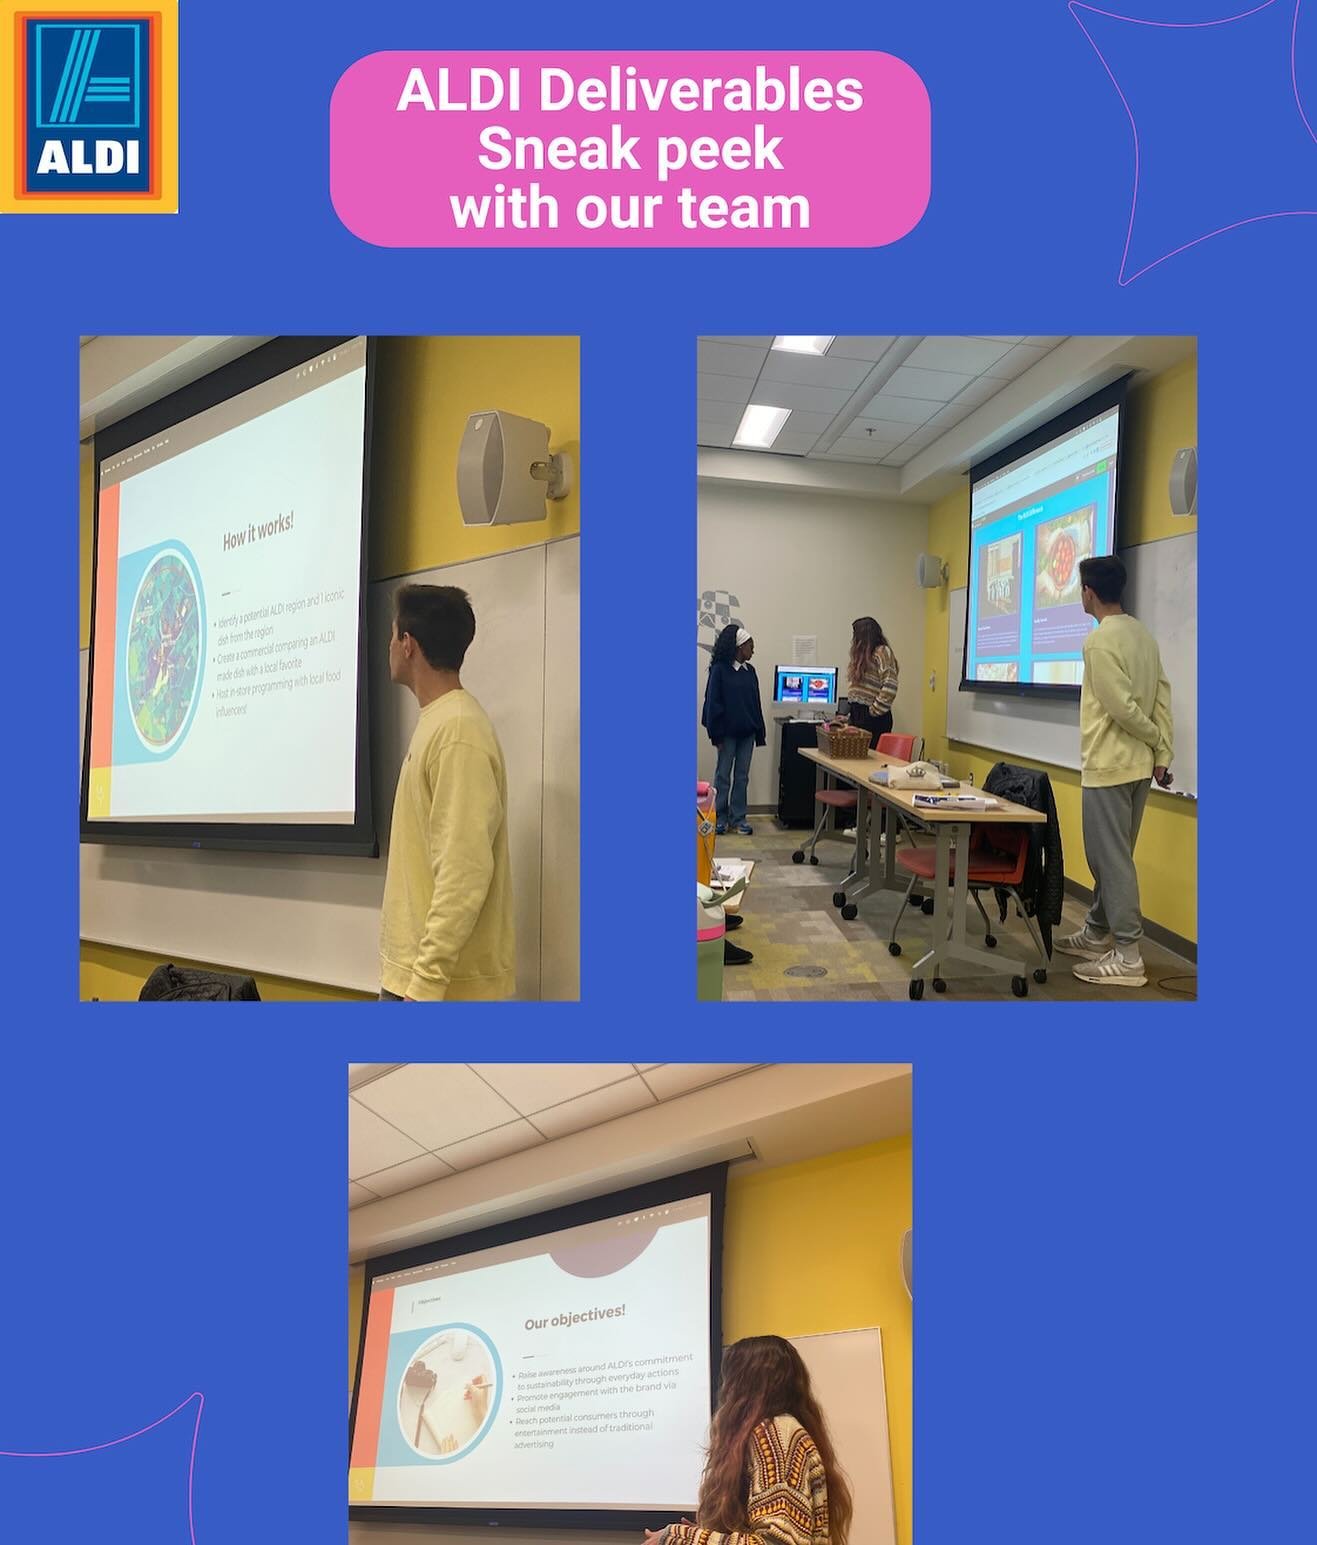 We are so excited to share our presentations with @aldiusa and @zenograms today! Here&rsquo;s a sneak peek of our presentations from our dress rehearsal last week. #SOC3 #ChangeUnited #AmericanUniversity #ChangeCantWait